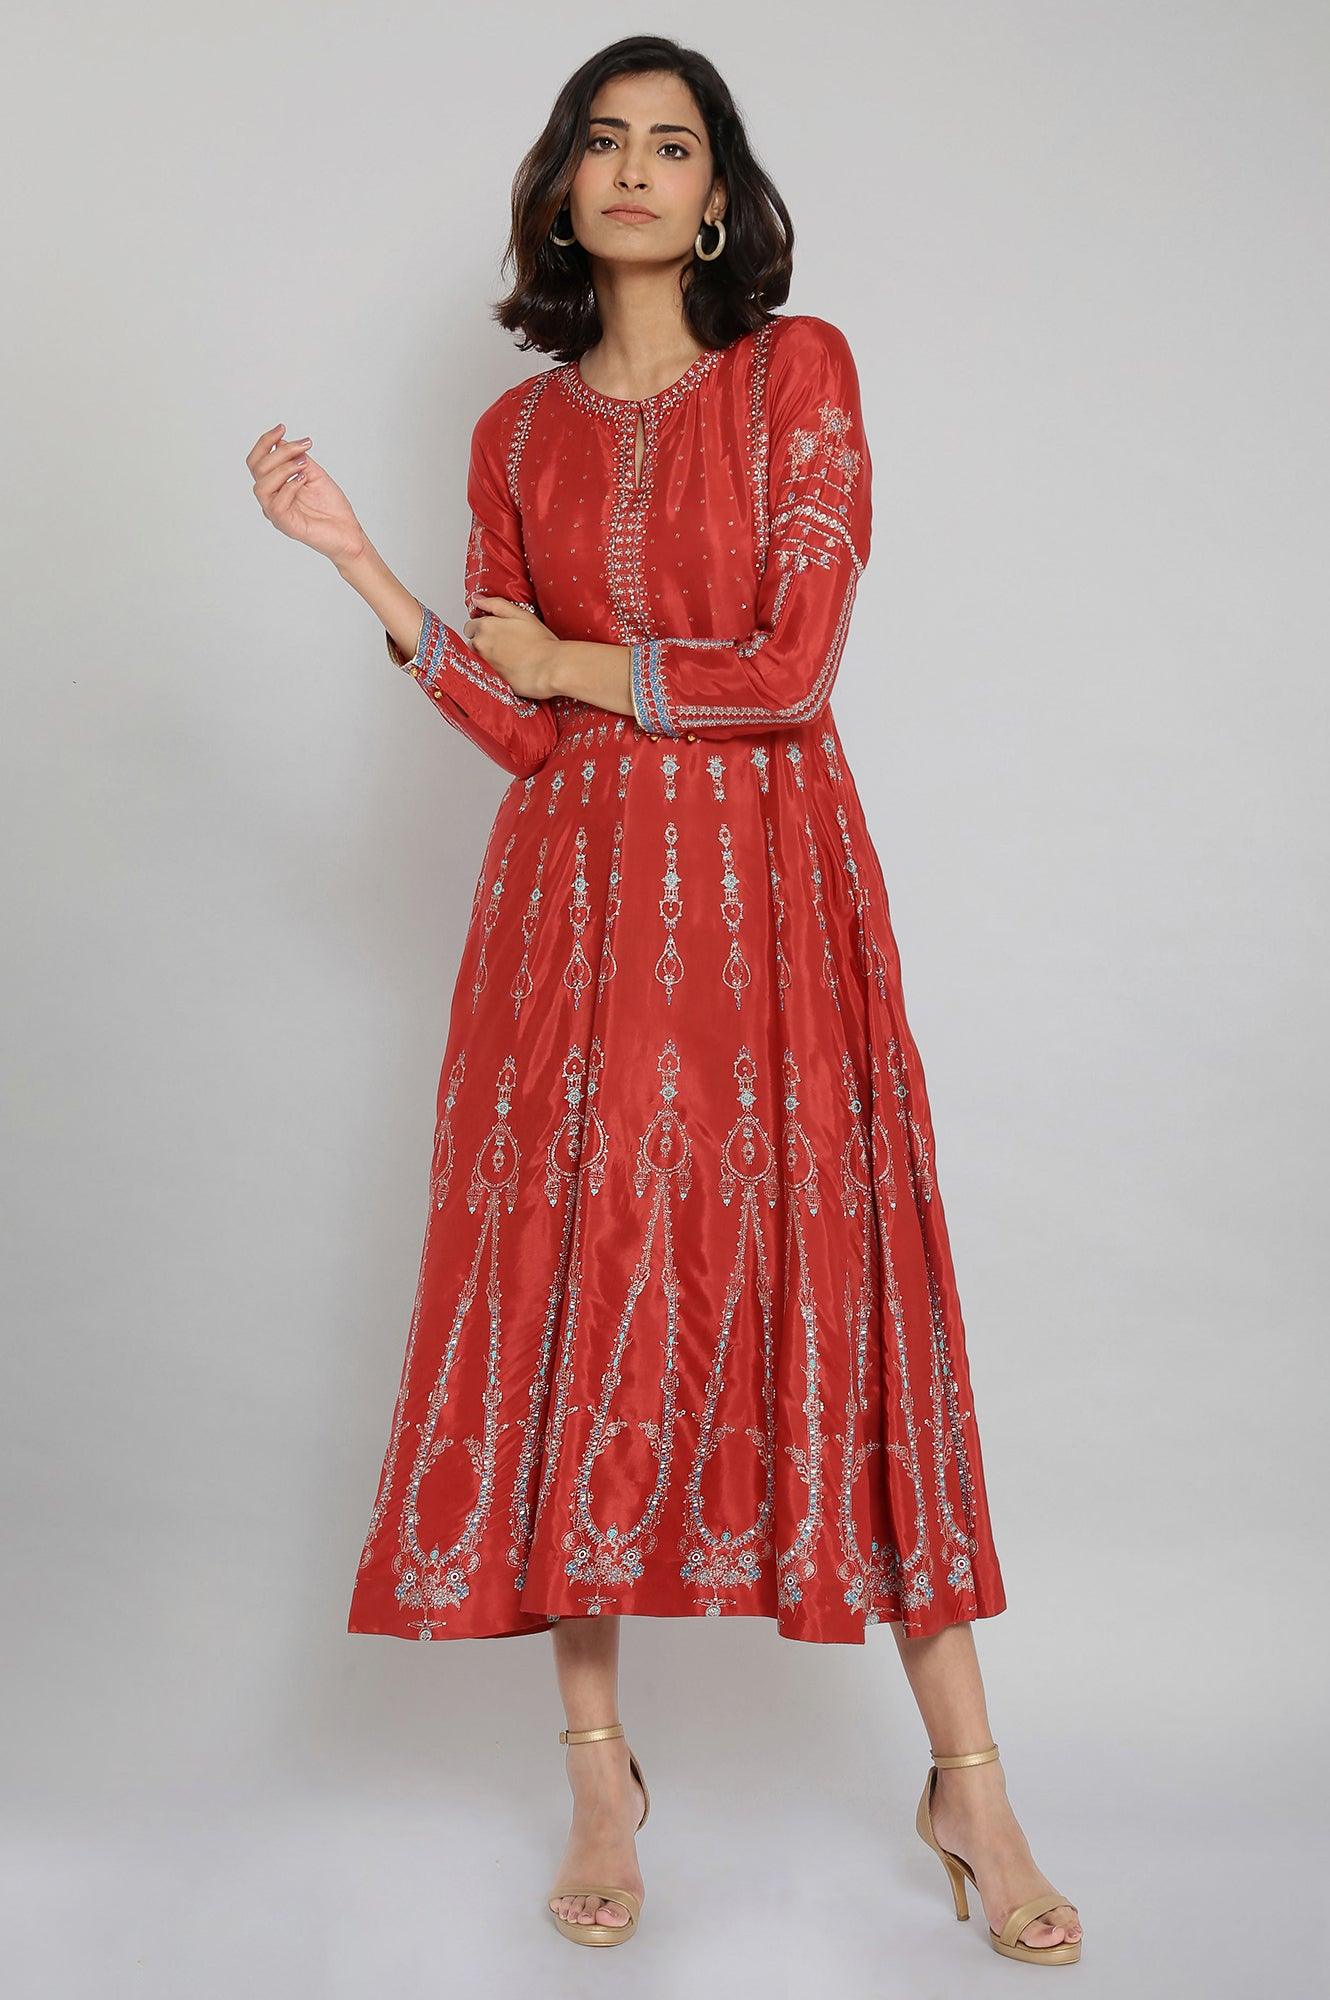 Rust Red Printed Dress with Embroidery - wforwoman